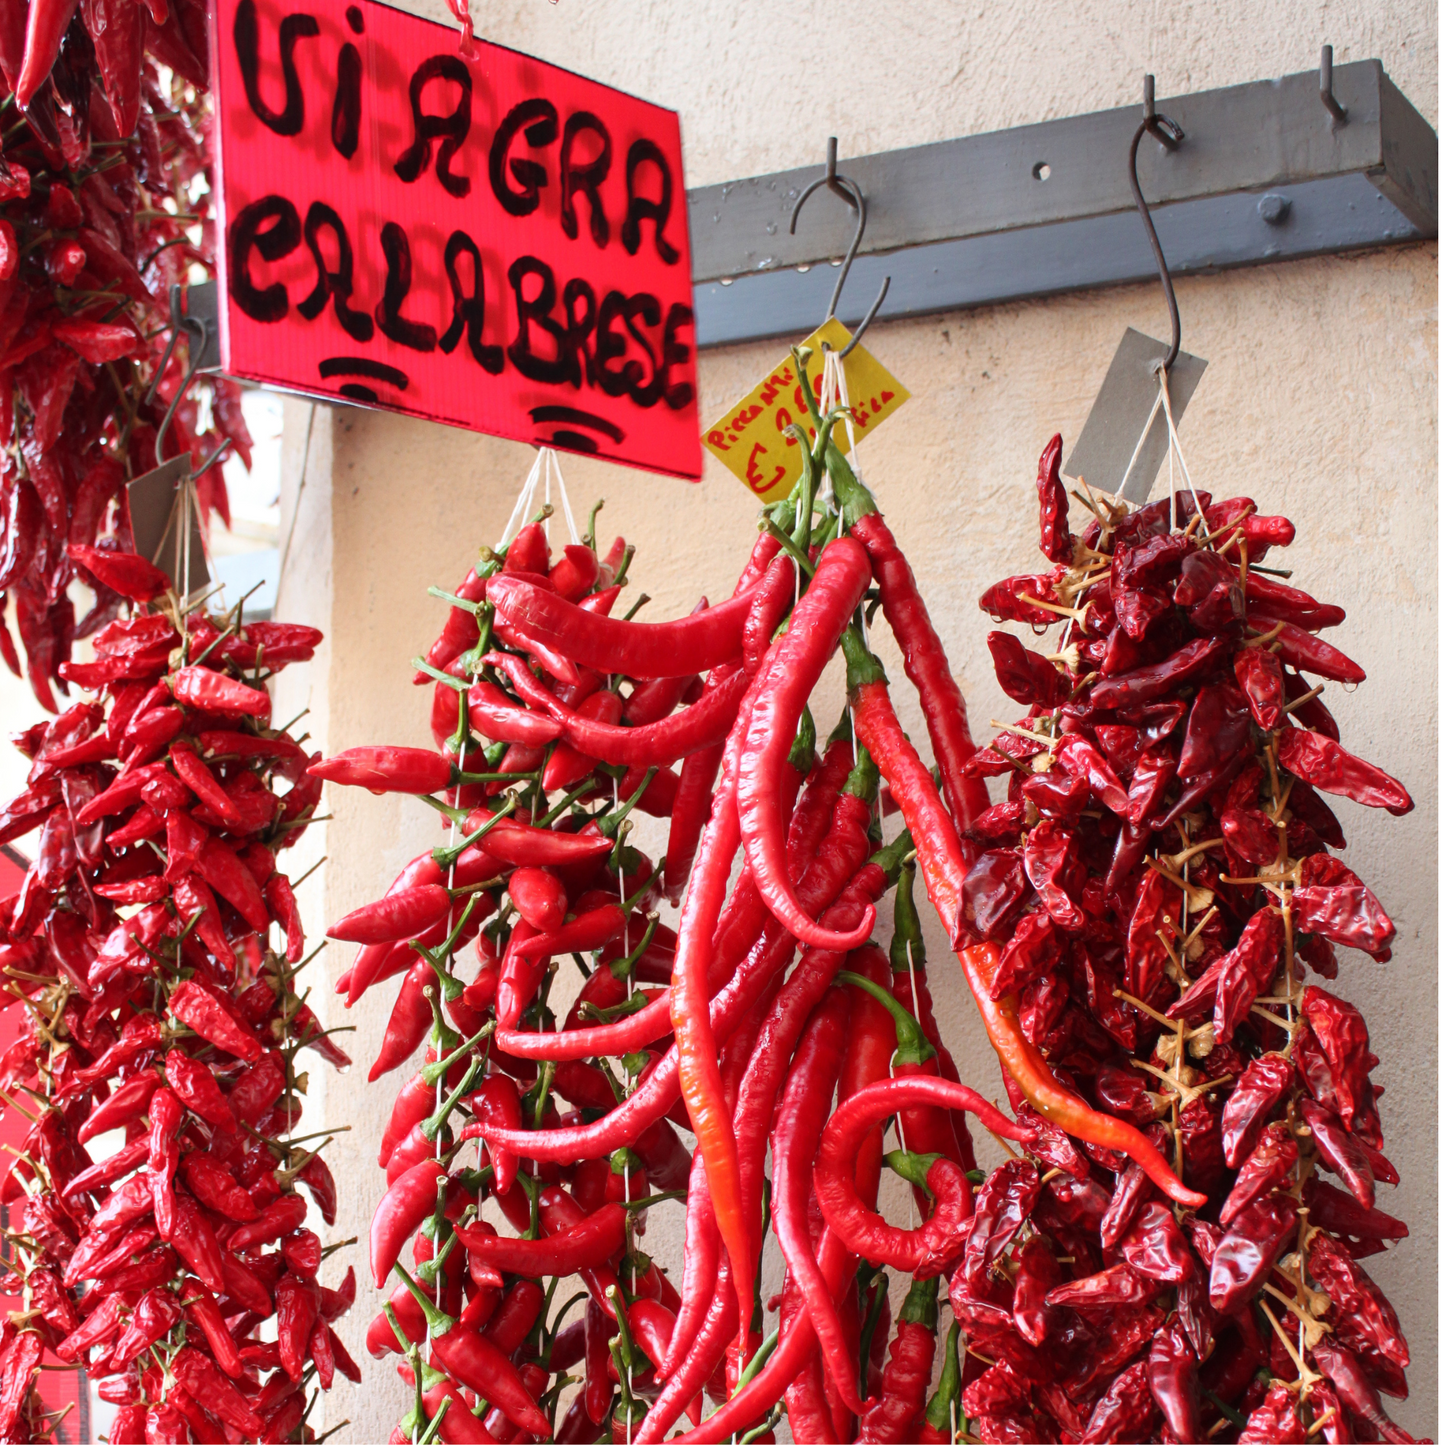 Chillies hanging from  hooks with a sign saying "viagra calabrese". Our vegan 'nduja uses chillies for their fiery taste